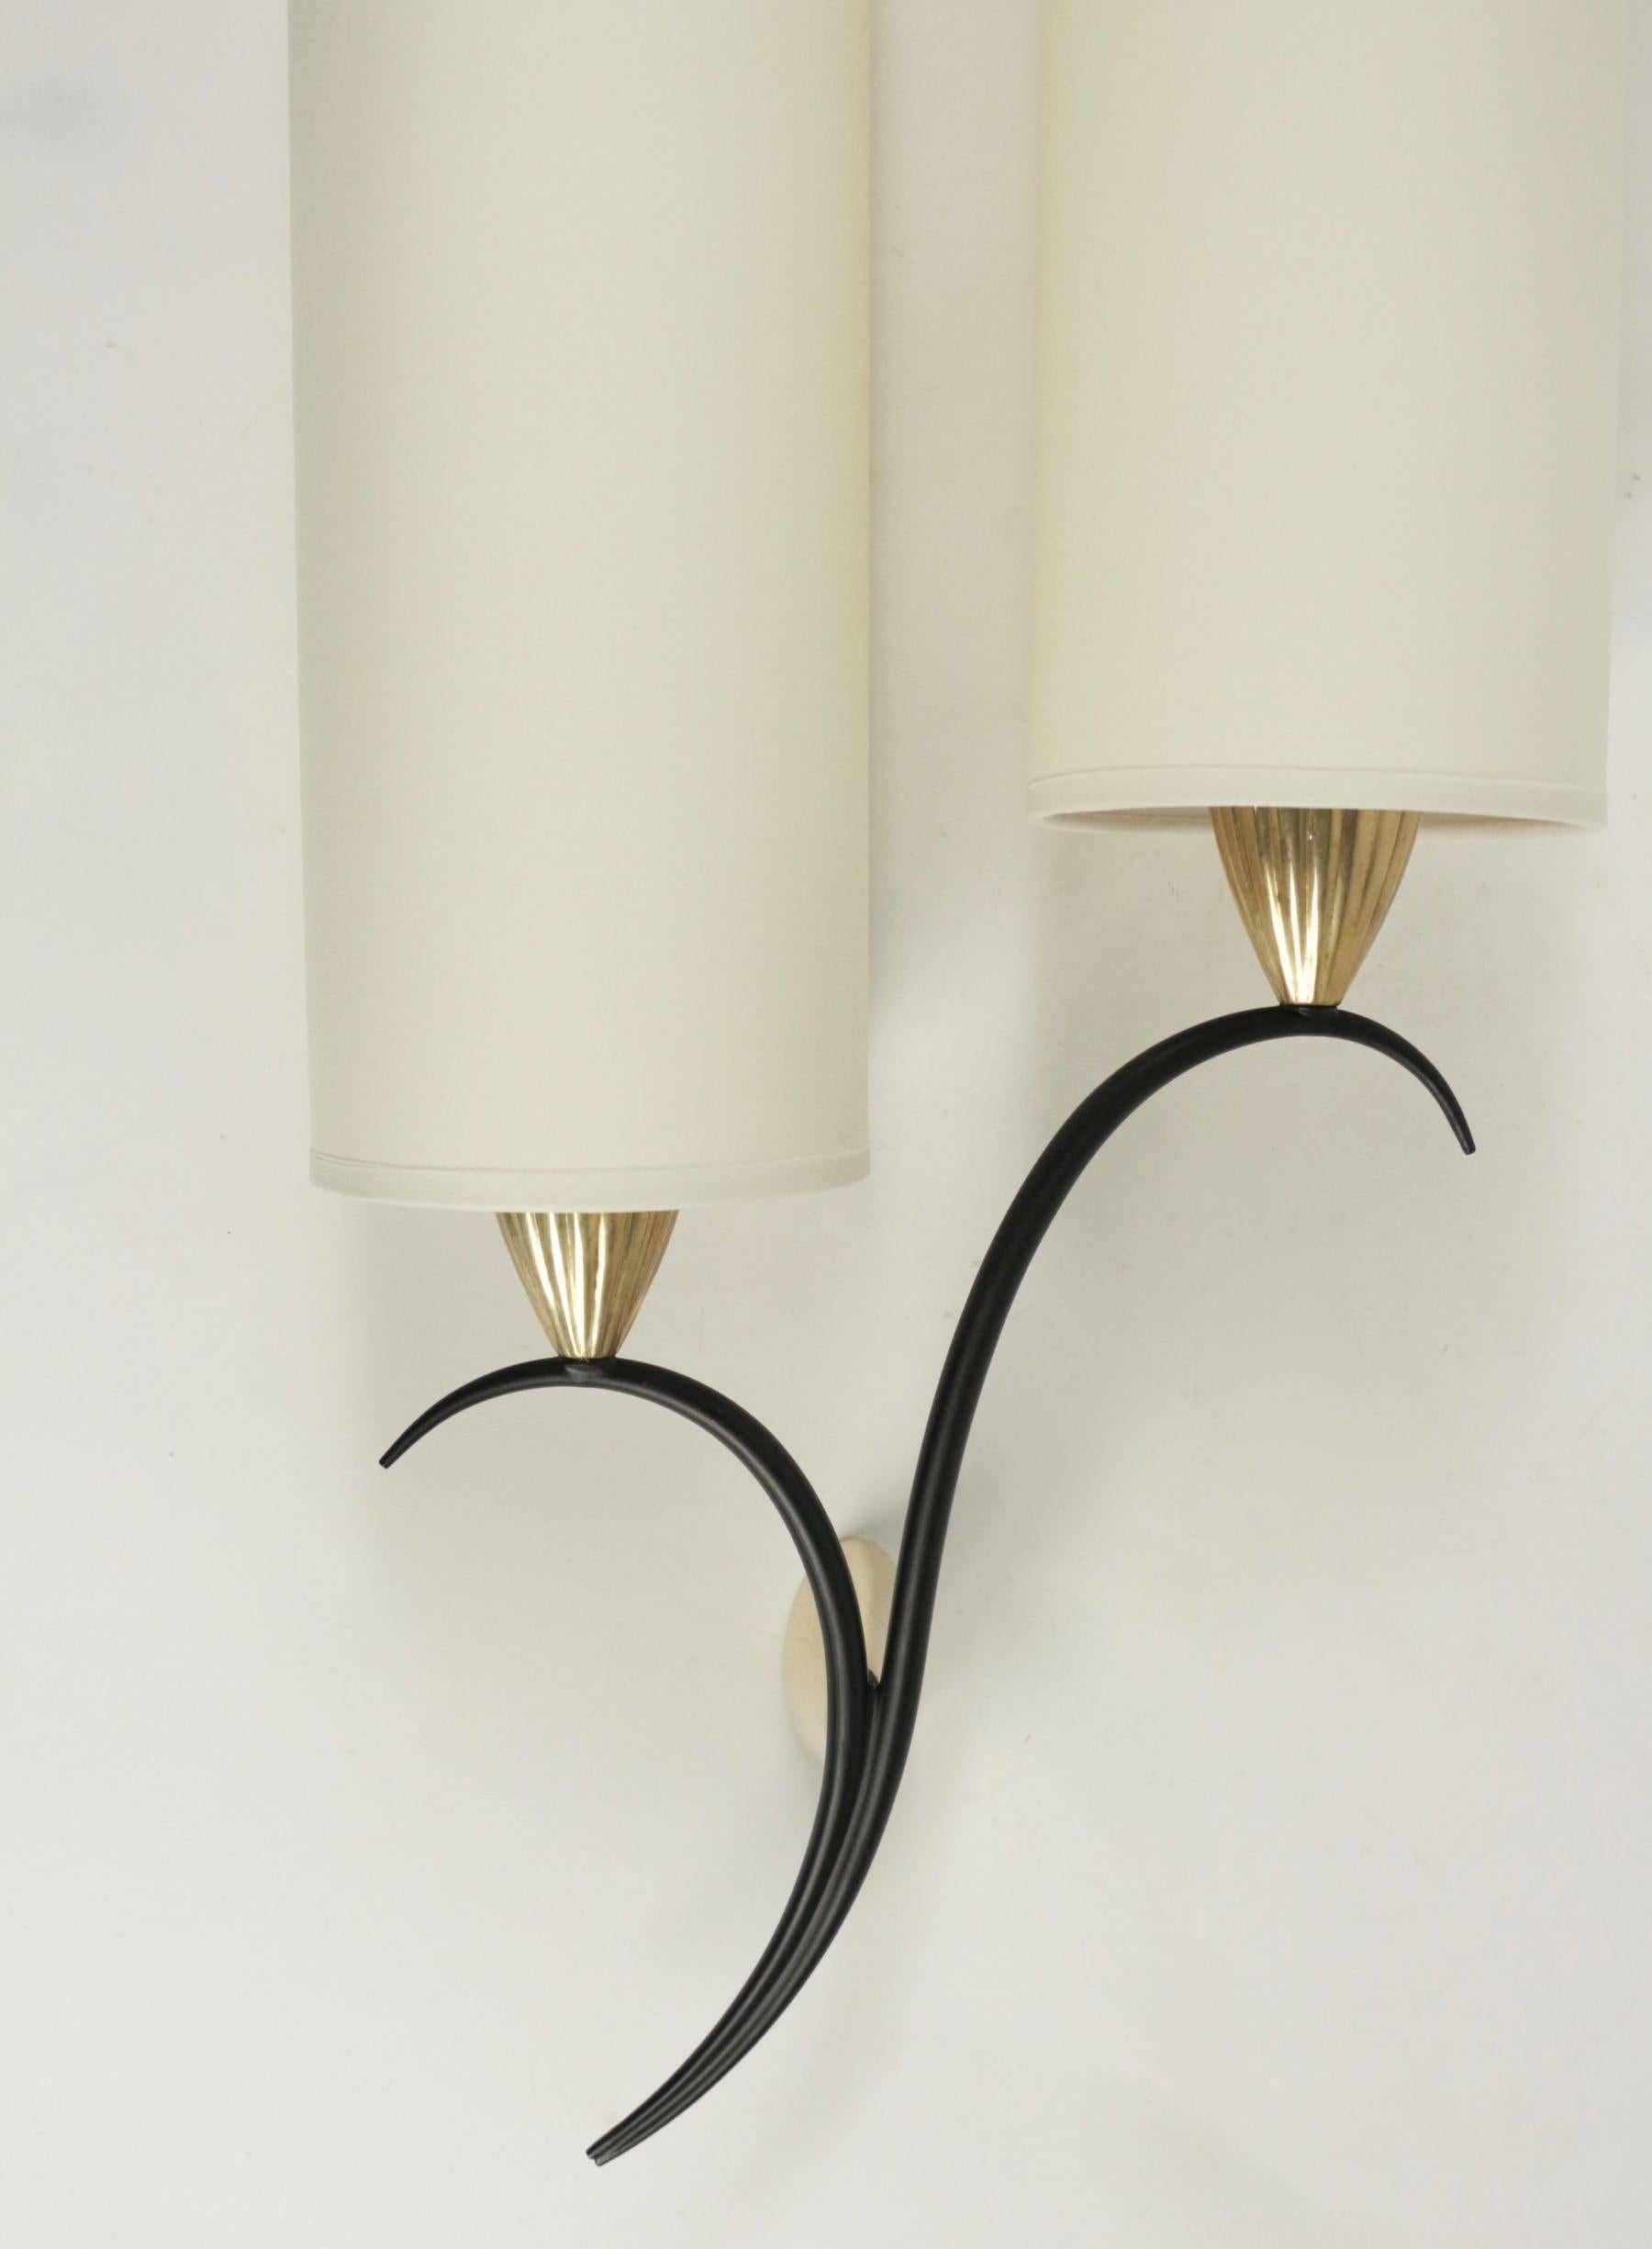 1950s pair of Arlus sconces.

The sconces are composed by two curved black lacquered arms.
The wall mounting and the bulbs sockets are made of gilded brass.

Handmade cylindrical lampshades granted to the originals, made of off-white cotton.